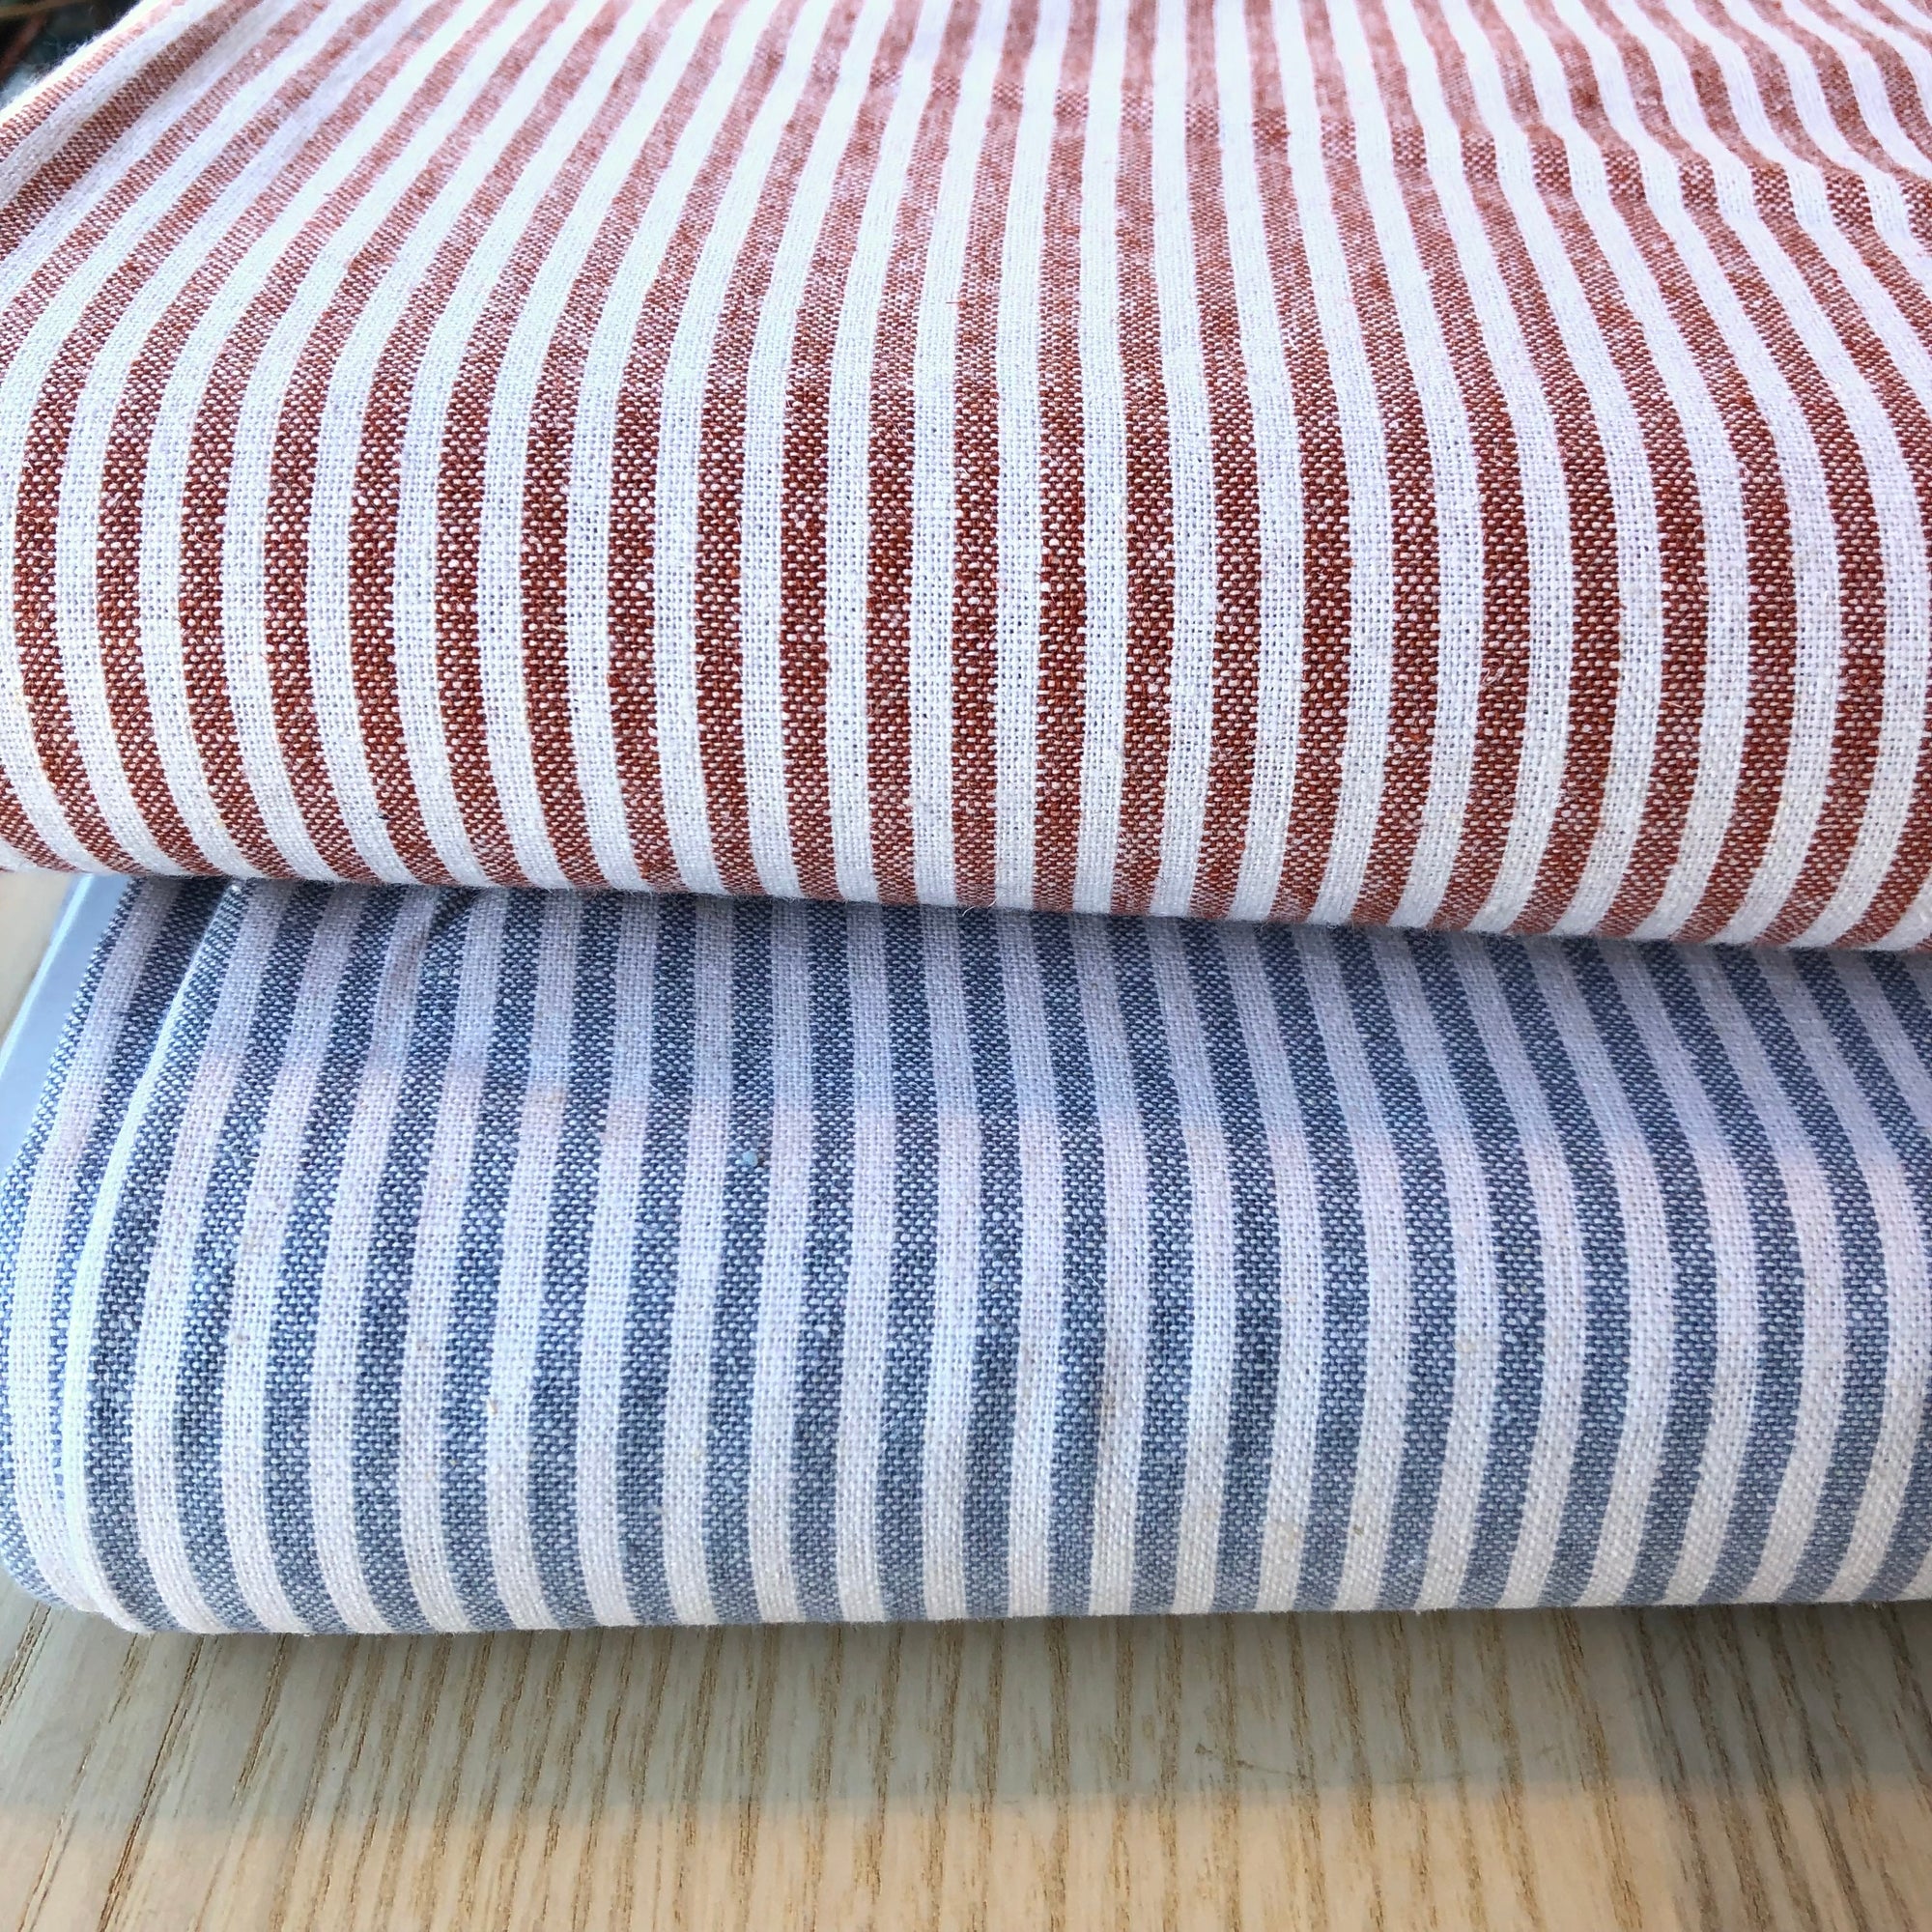 Essex Yarn Dyed Classic Woven Chambray Stripes